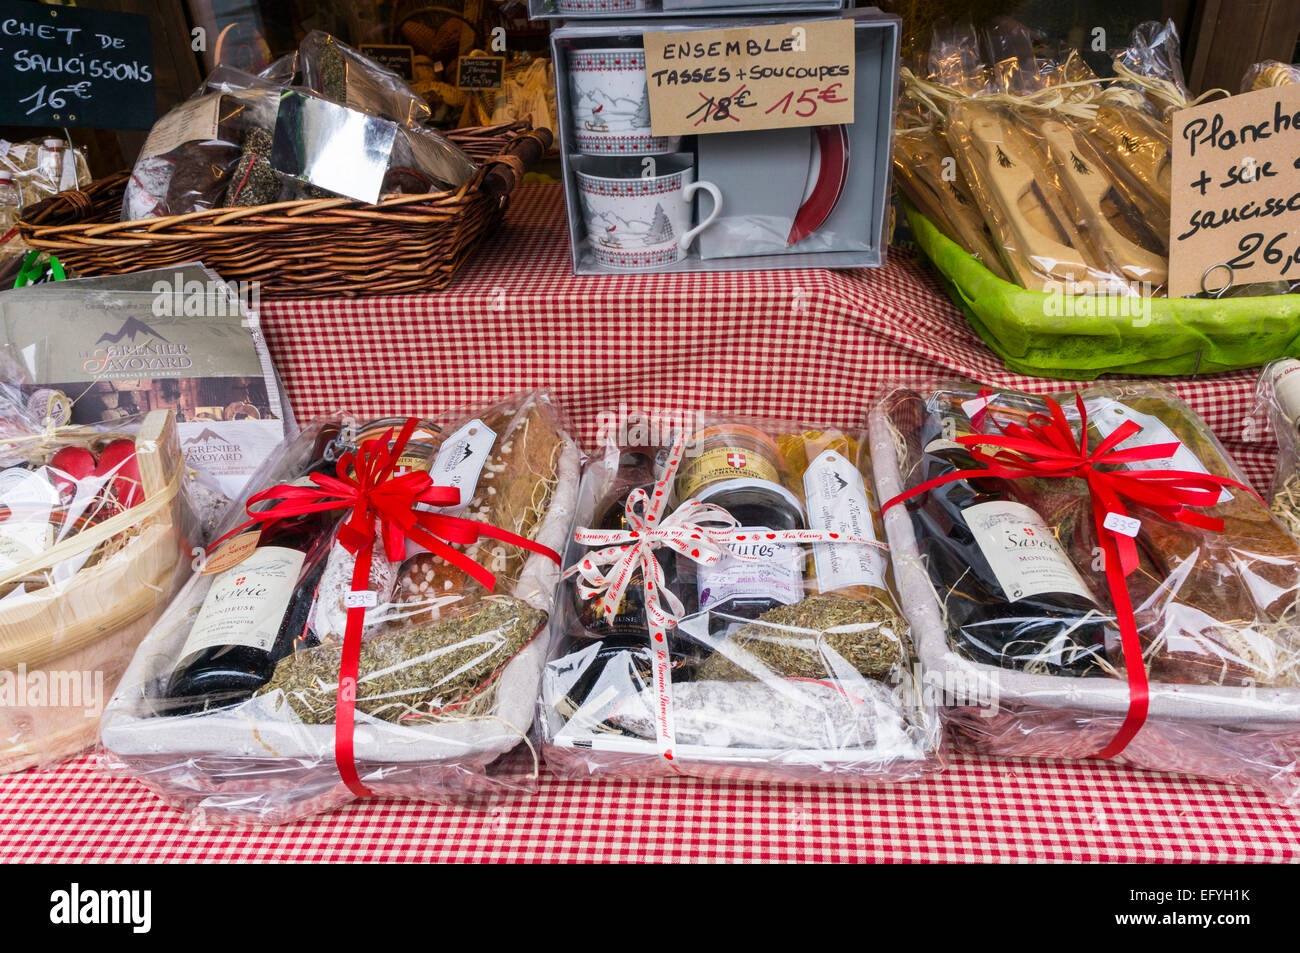 French Savoie food gifts on display in a shop in Samoens village, French Alps, France, Europe Stock Photo